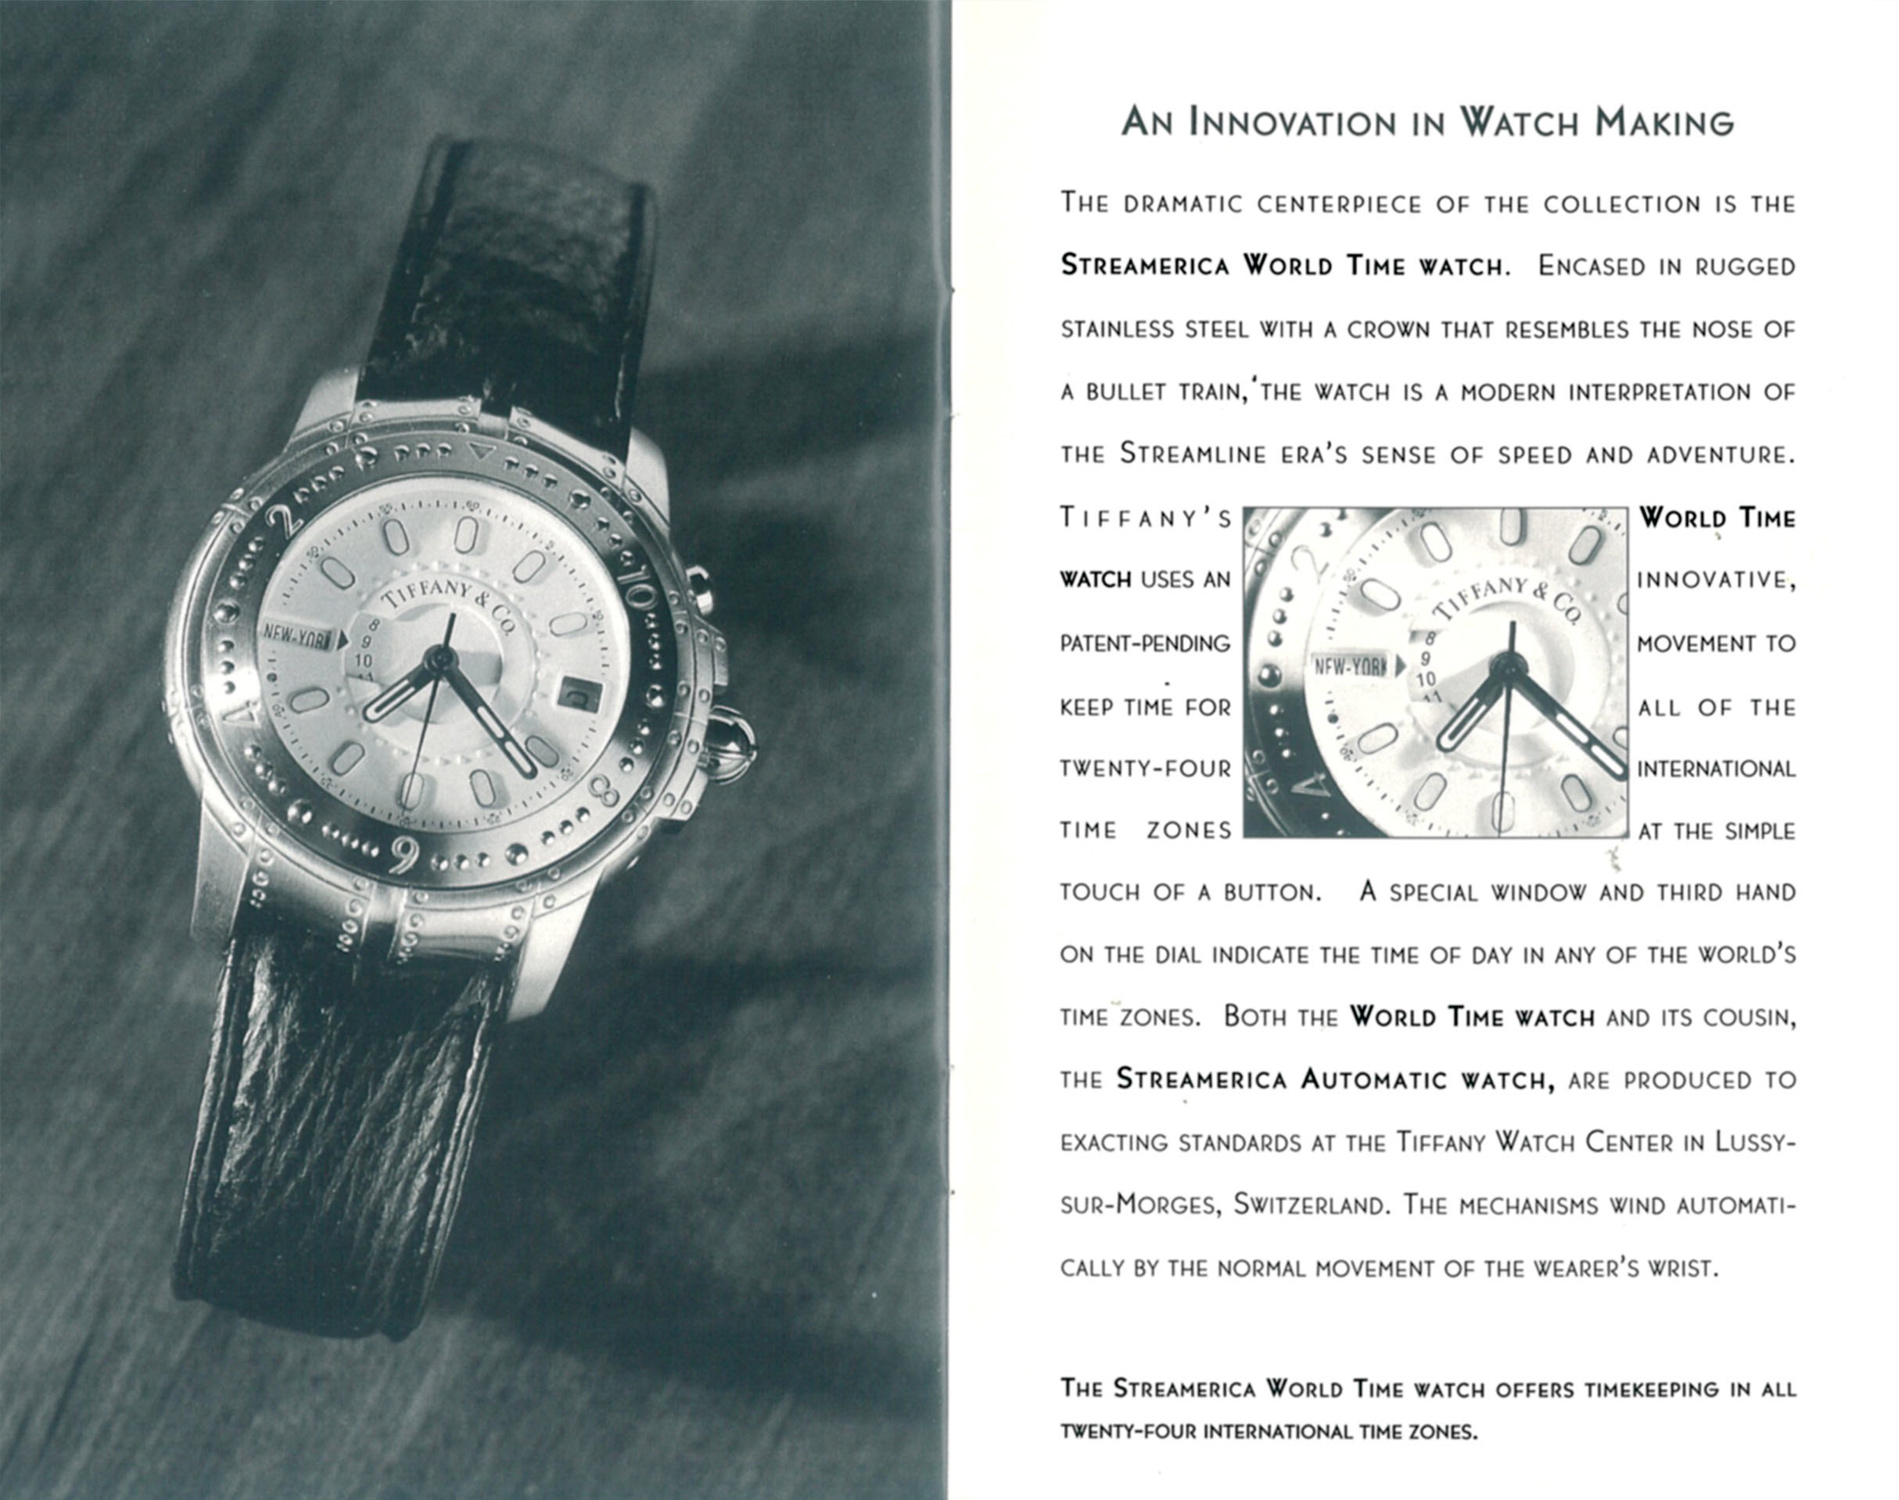 1993 Streamerica Blue Catalog by Tiffany & Co. World Time Watch movement details